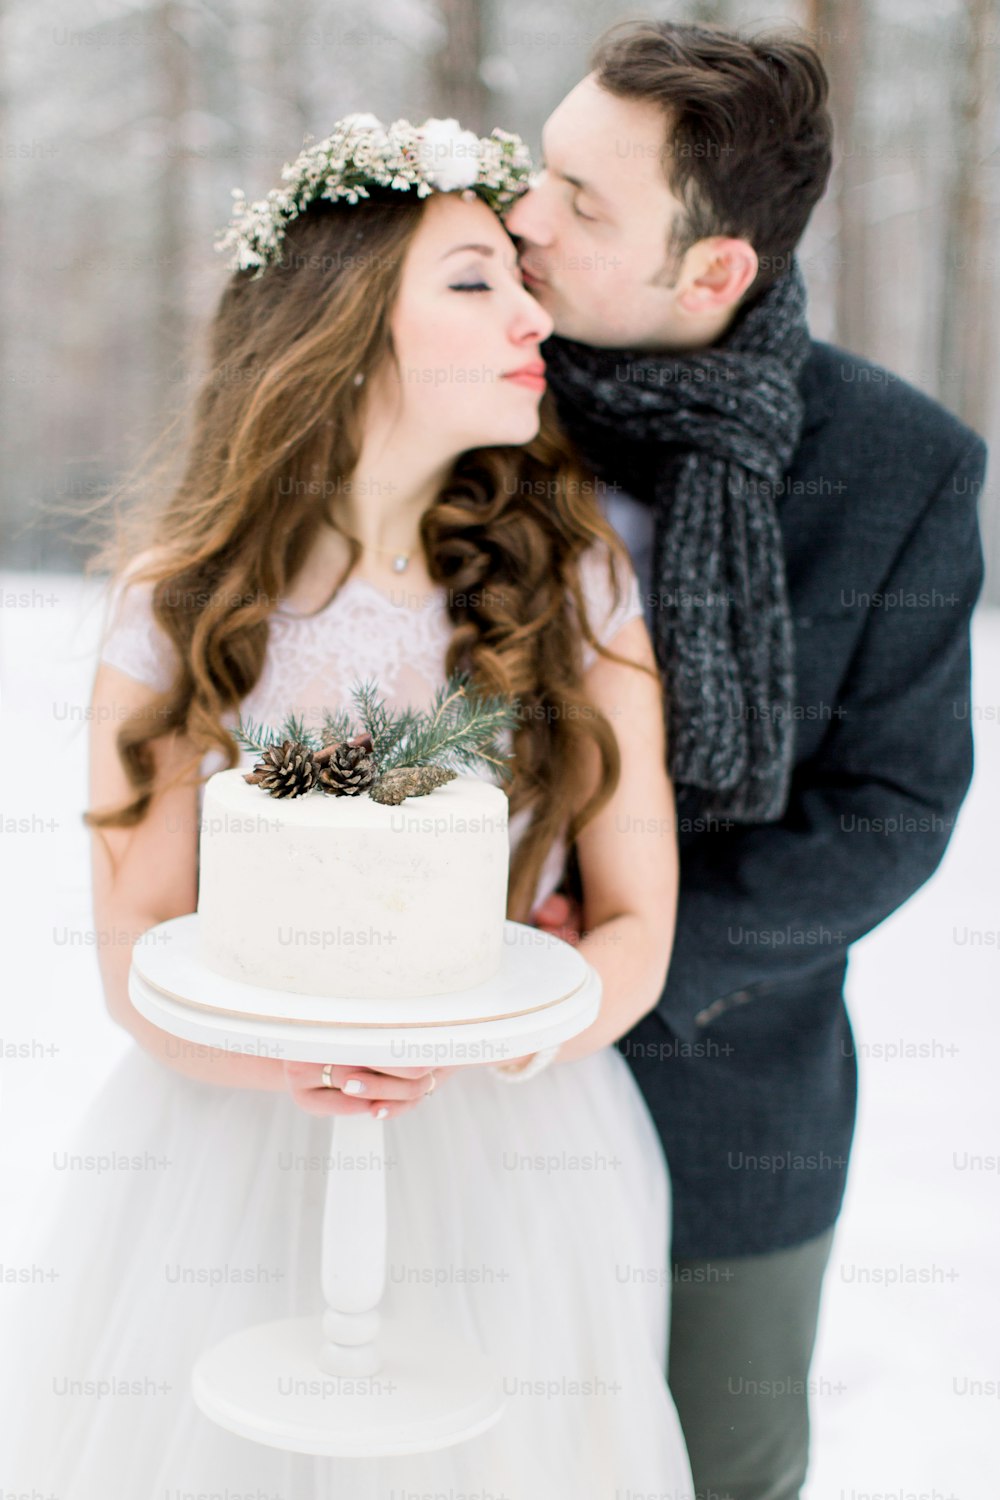 Beautiful wedding couple posing with decorated cake in hands standing outdoors in forest, groom kissing her bride. Winter snowy forest background.